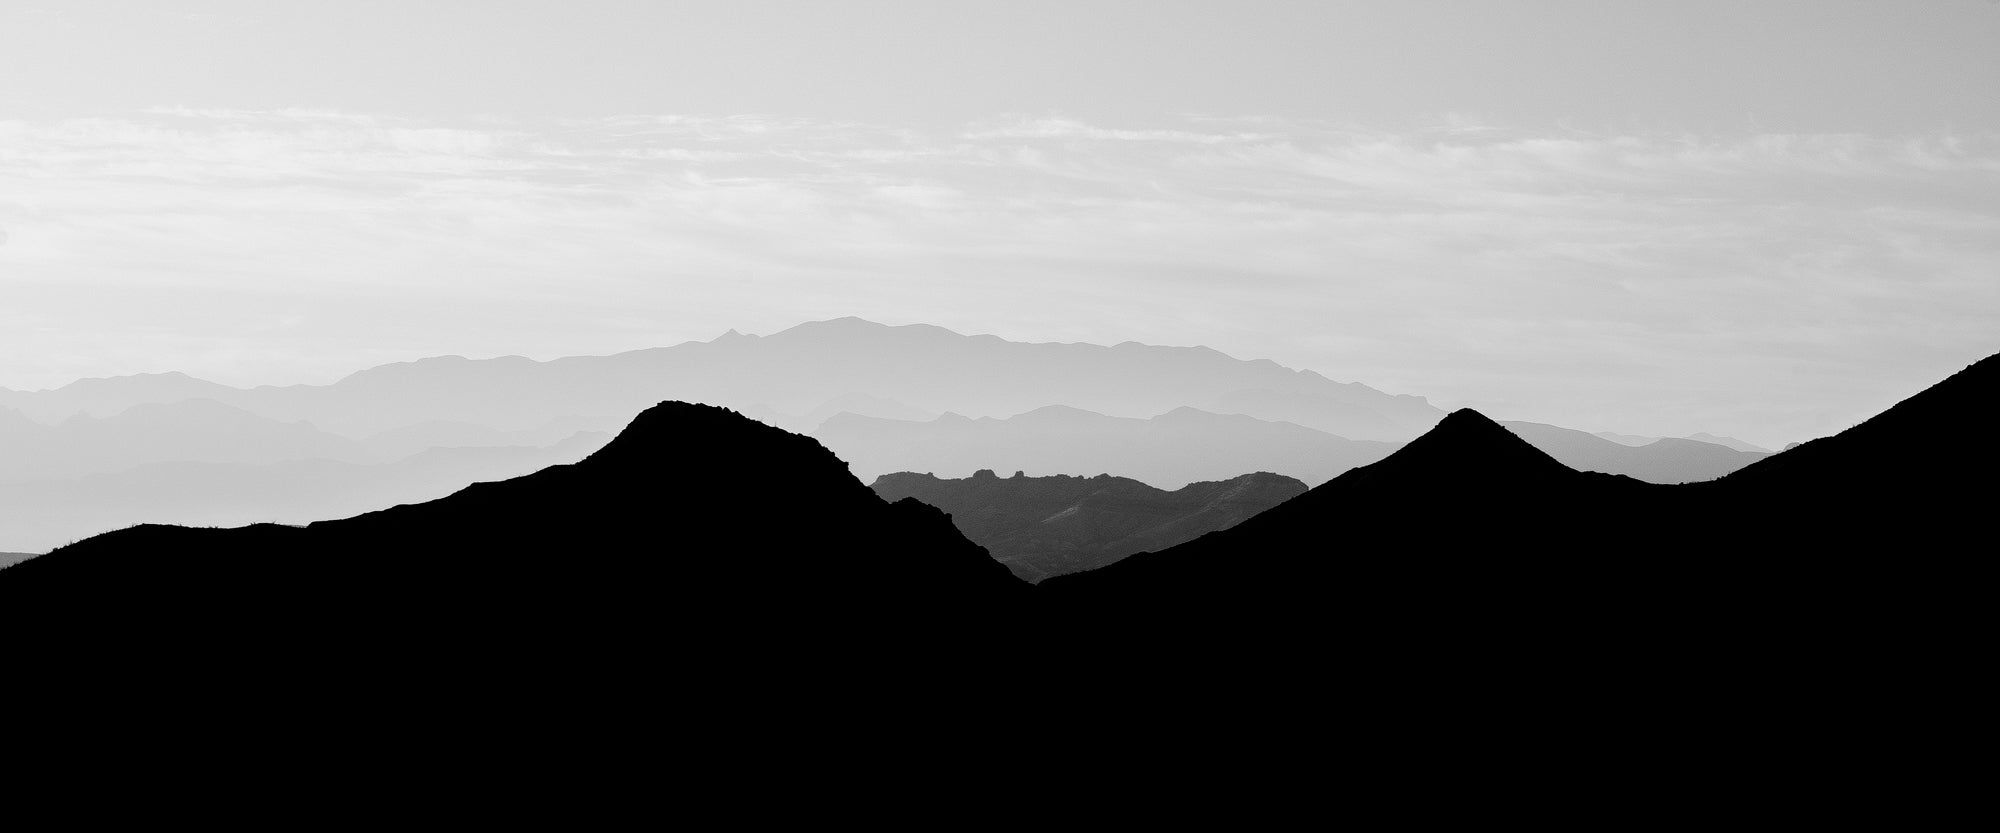 Mountain Sunrise. Black and White Photograph by Keith Dotson. Click to buy a fine art print.